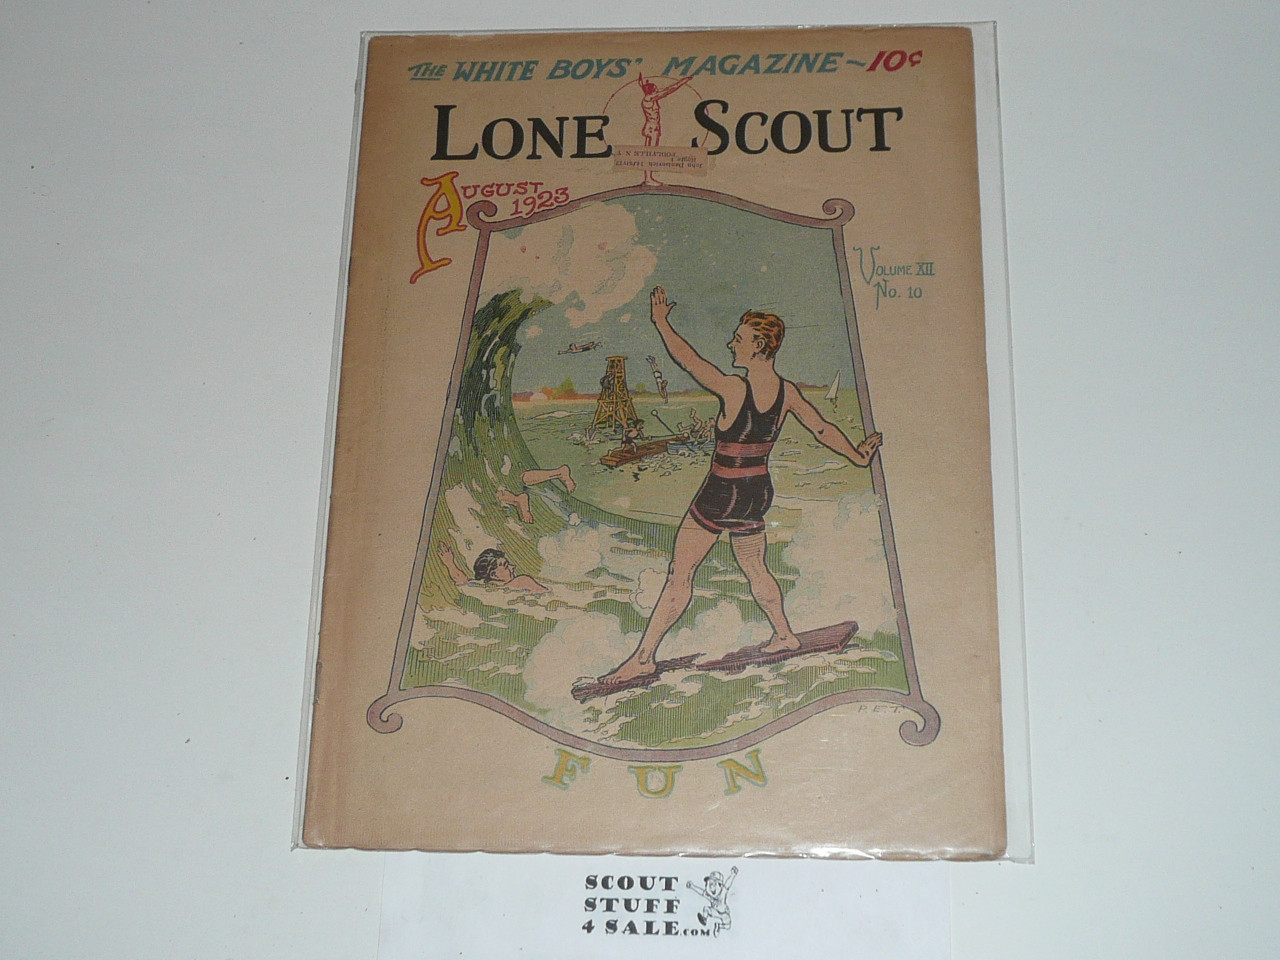 1923 Lone Scout Magazine, August, Vol 12 #10